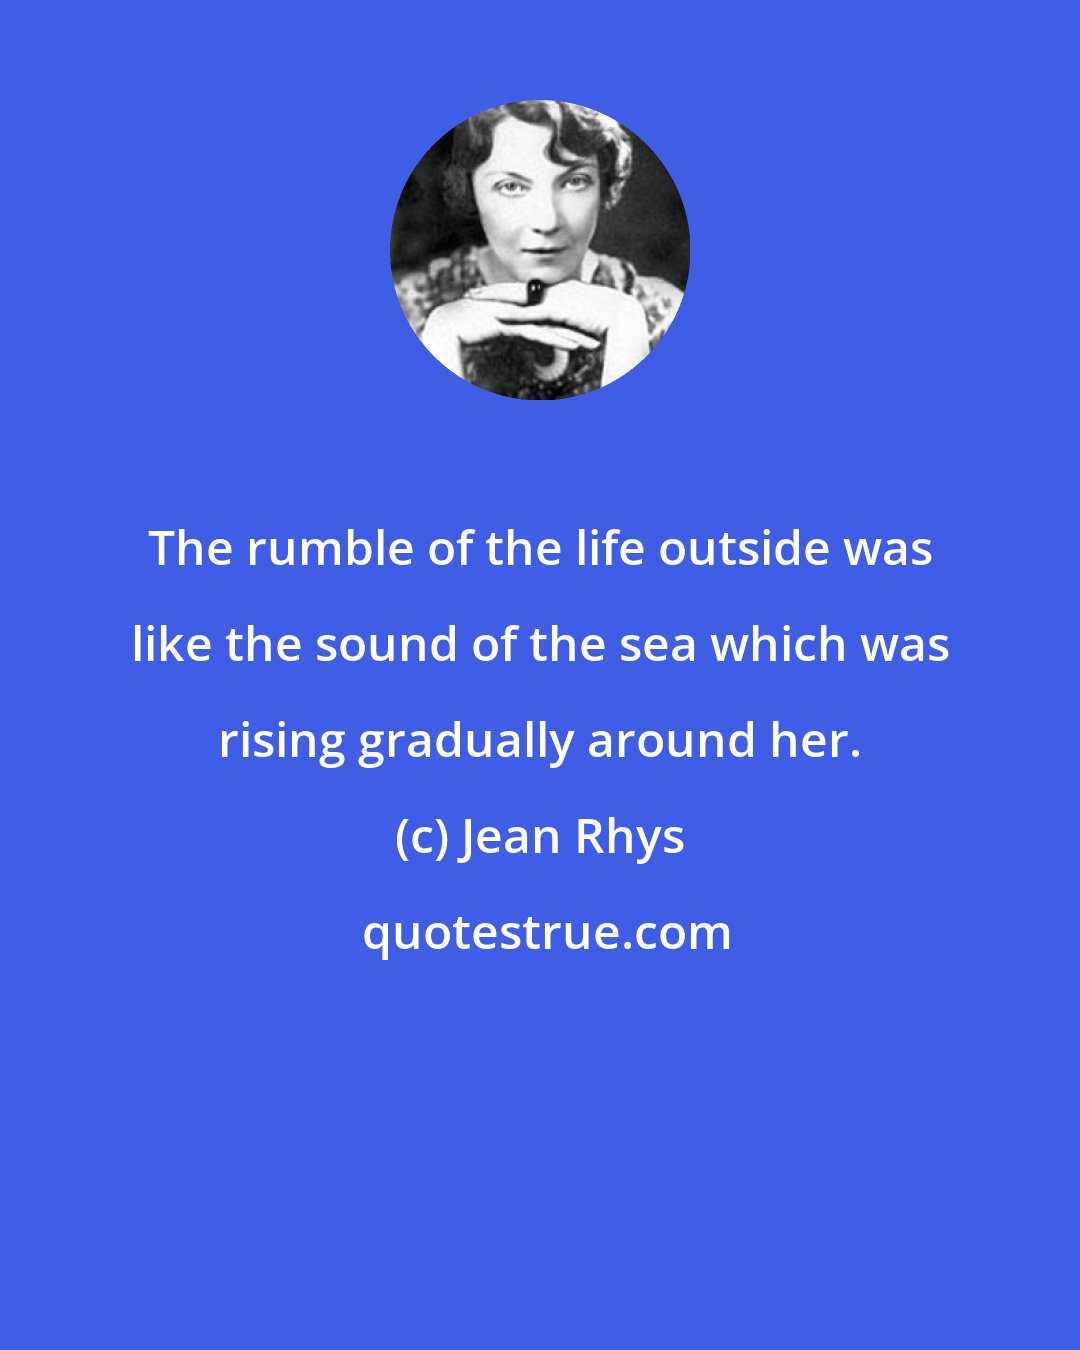 Jean Rhys: The rumble of the life outside was like the sound of the sea which was rising gradually around her.